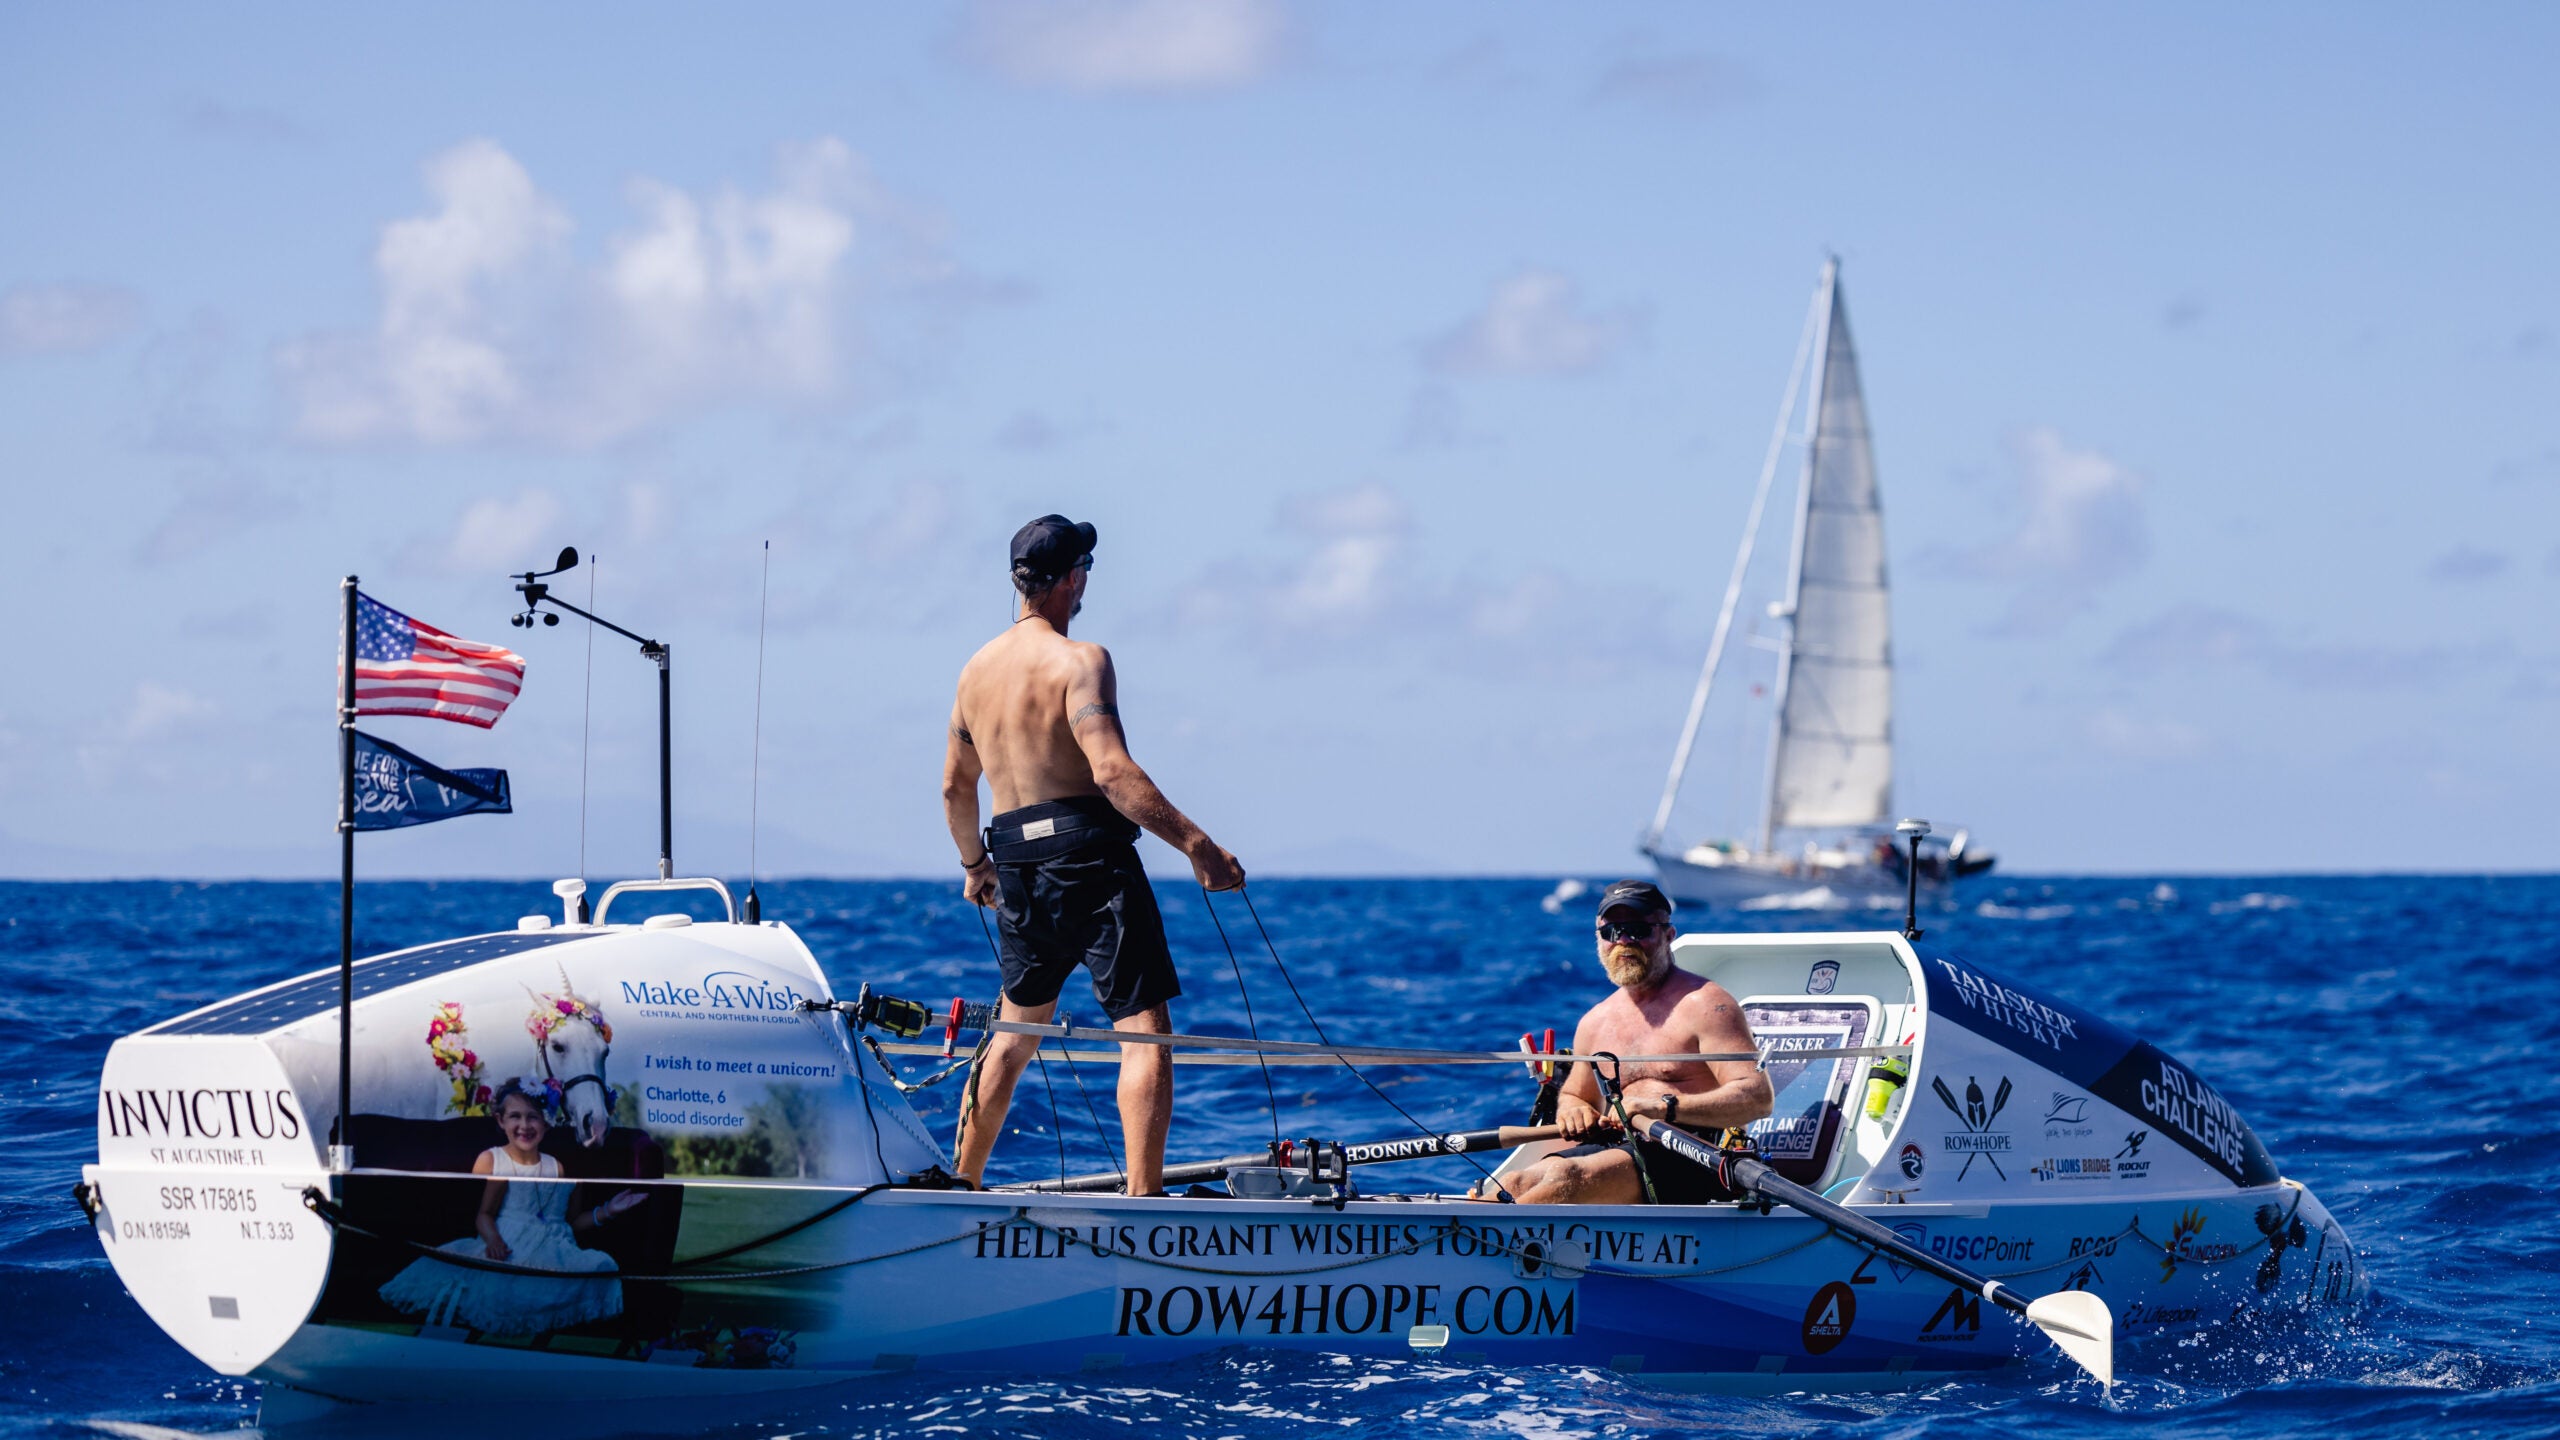 Transoceanic Rowing Is the Craziest Endurance Sport You’ve Never Heard Of